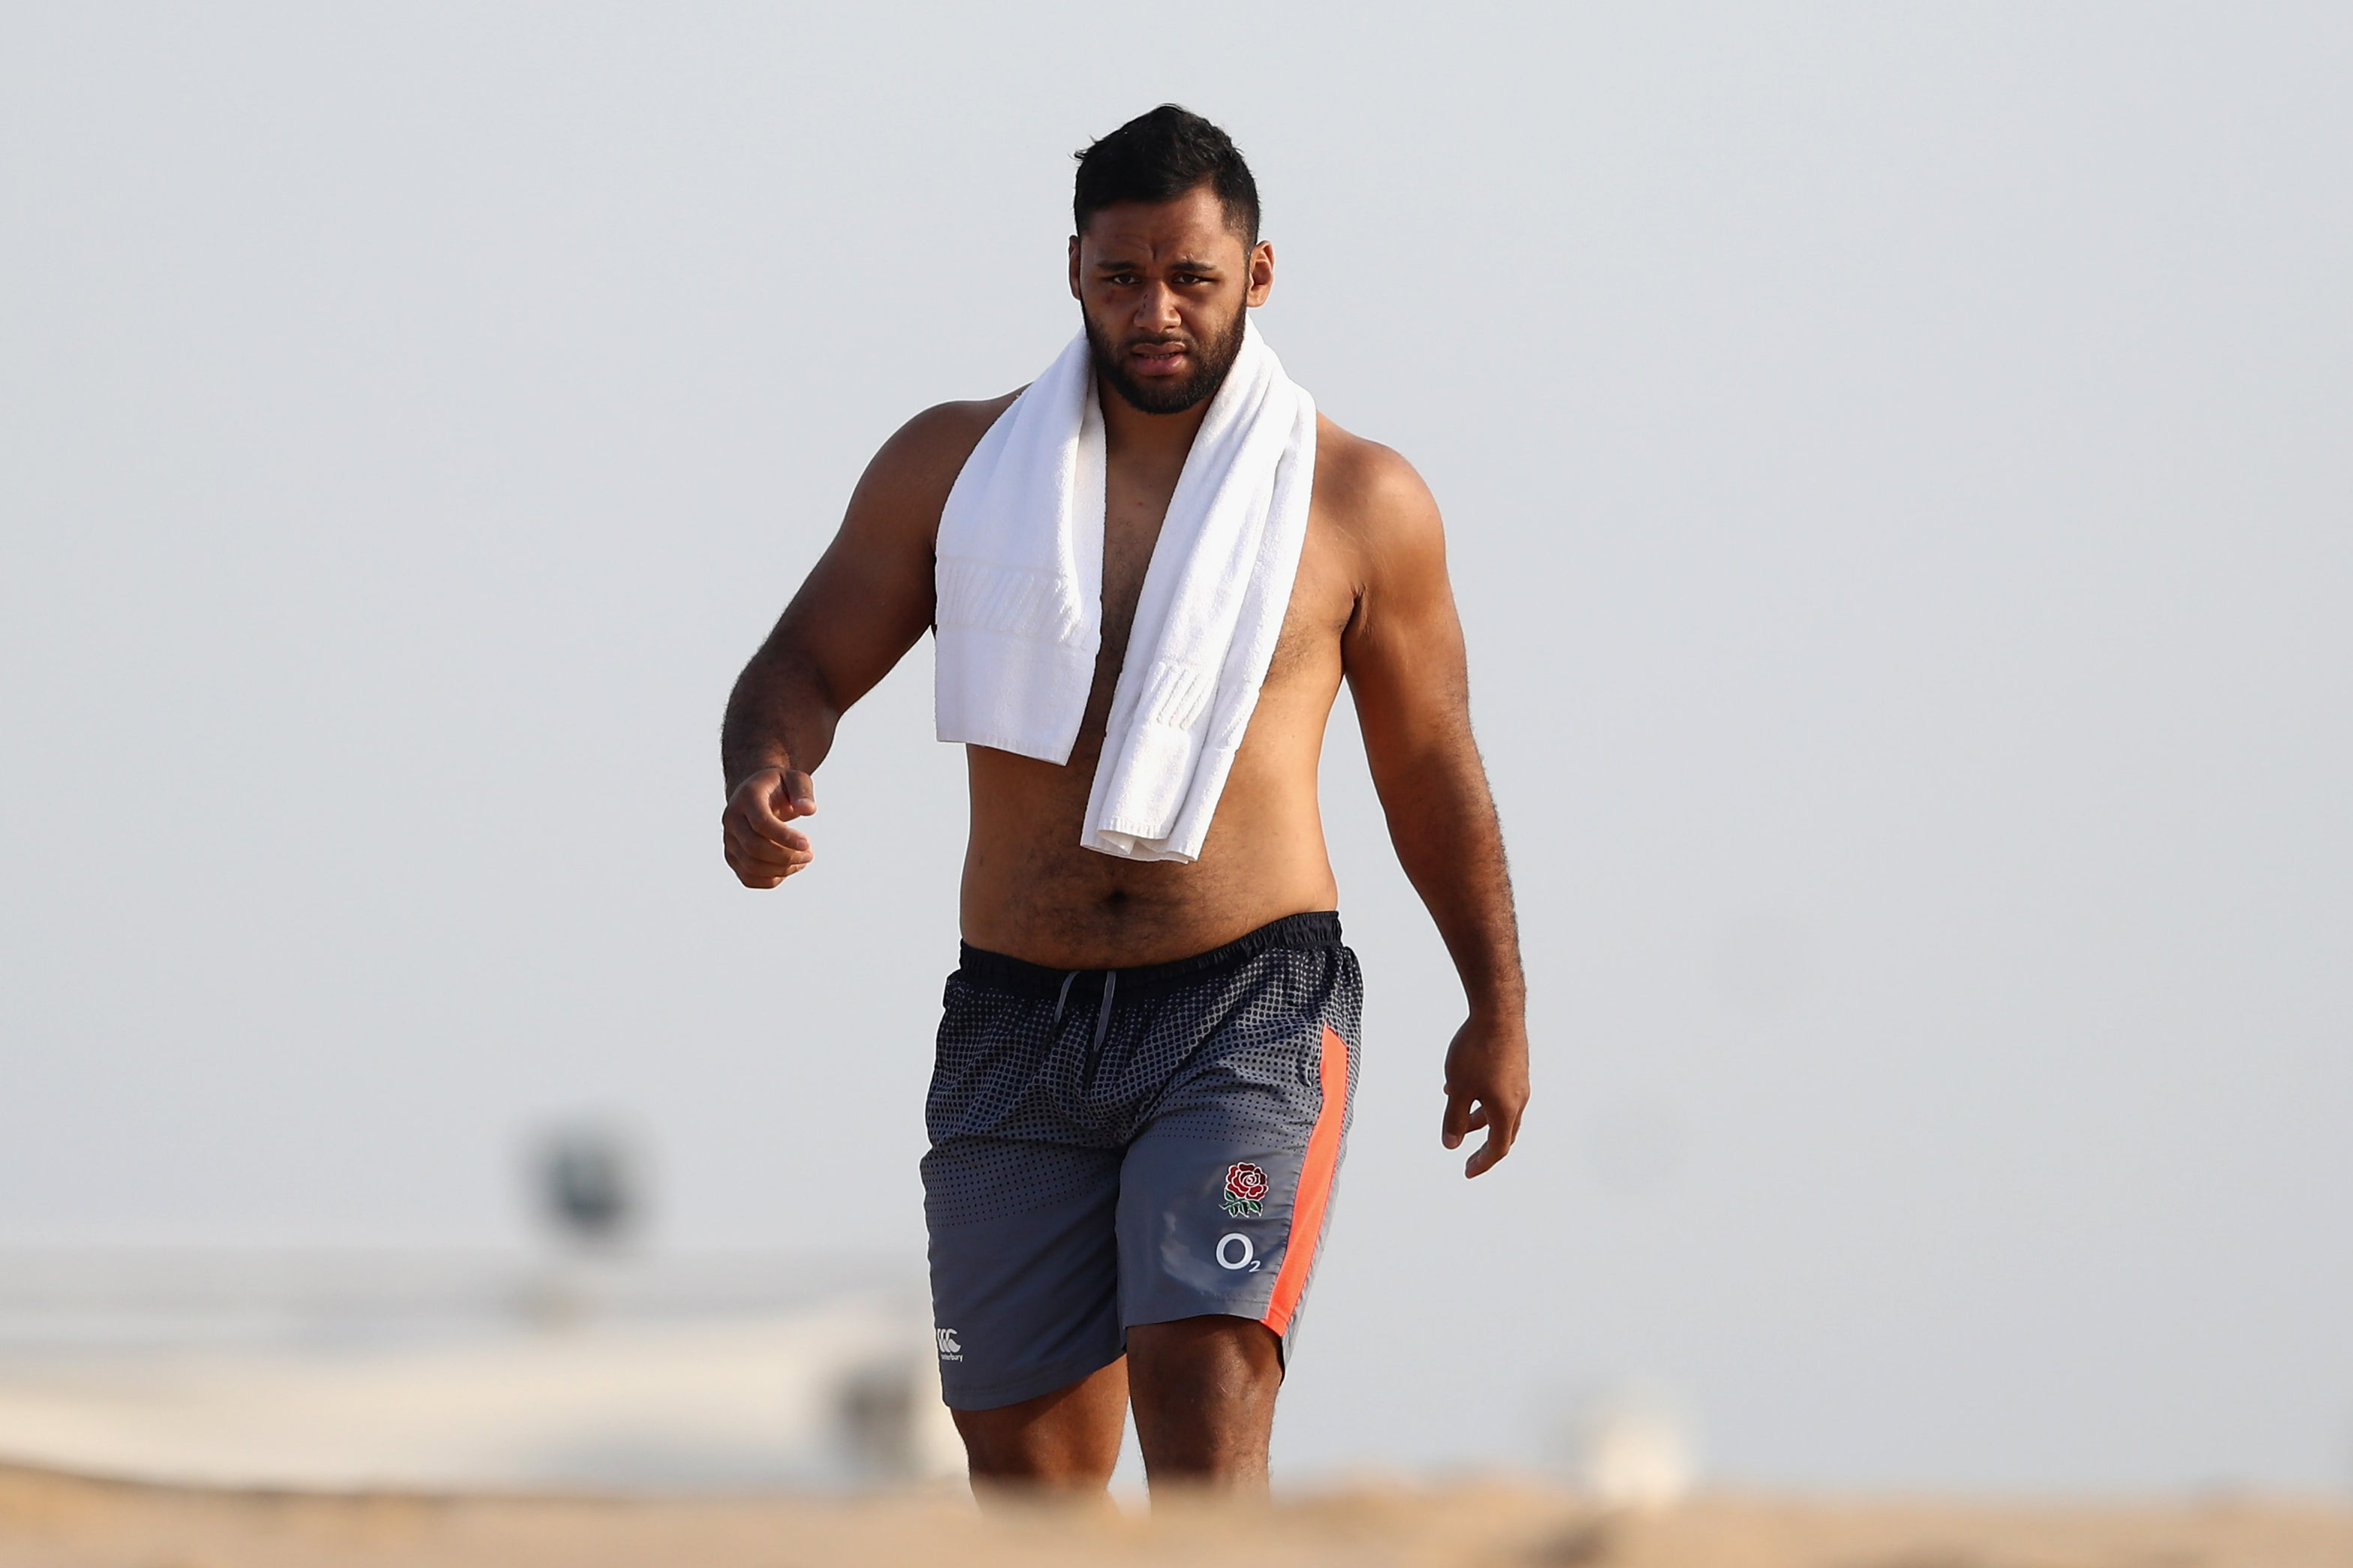 Vunipola was at a bar in Mallorca when the incident occurred